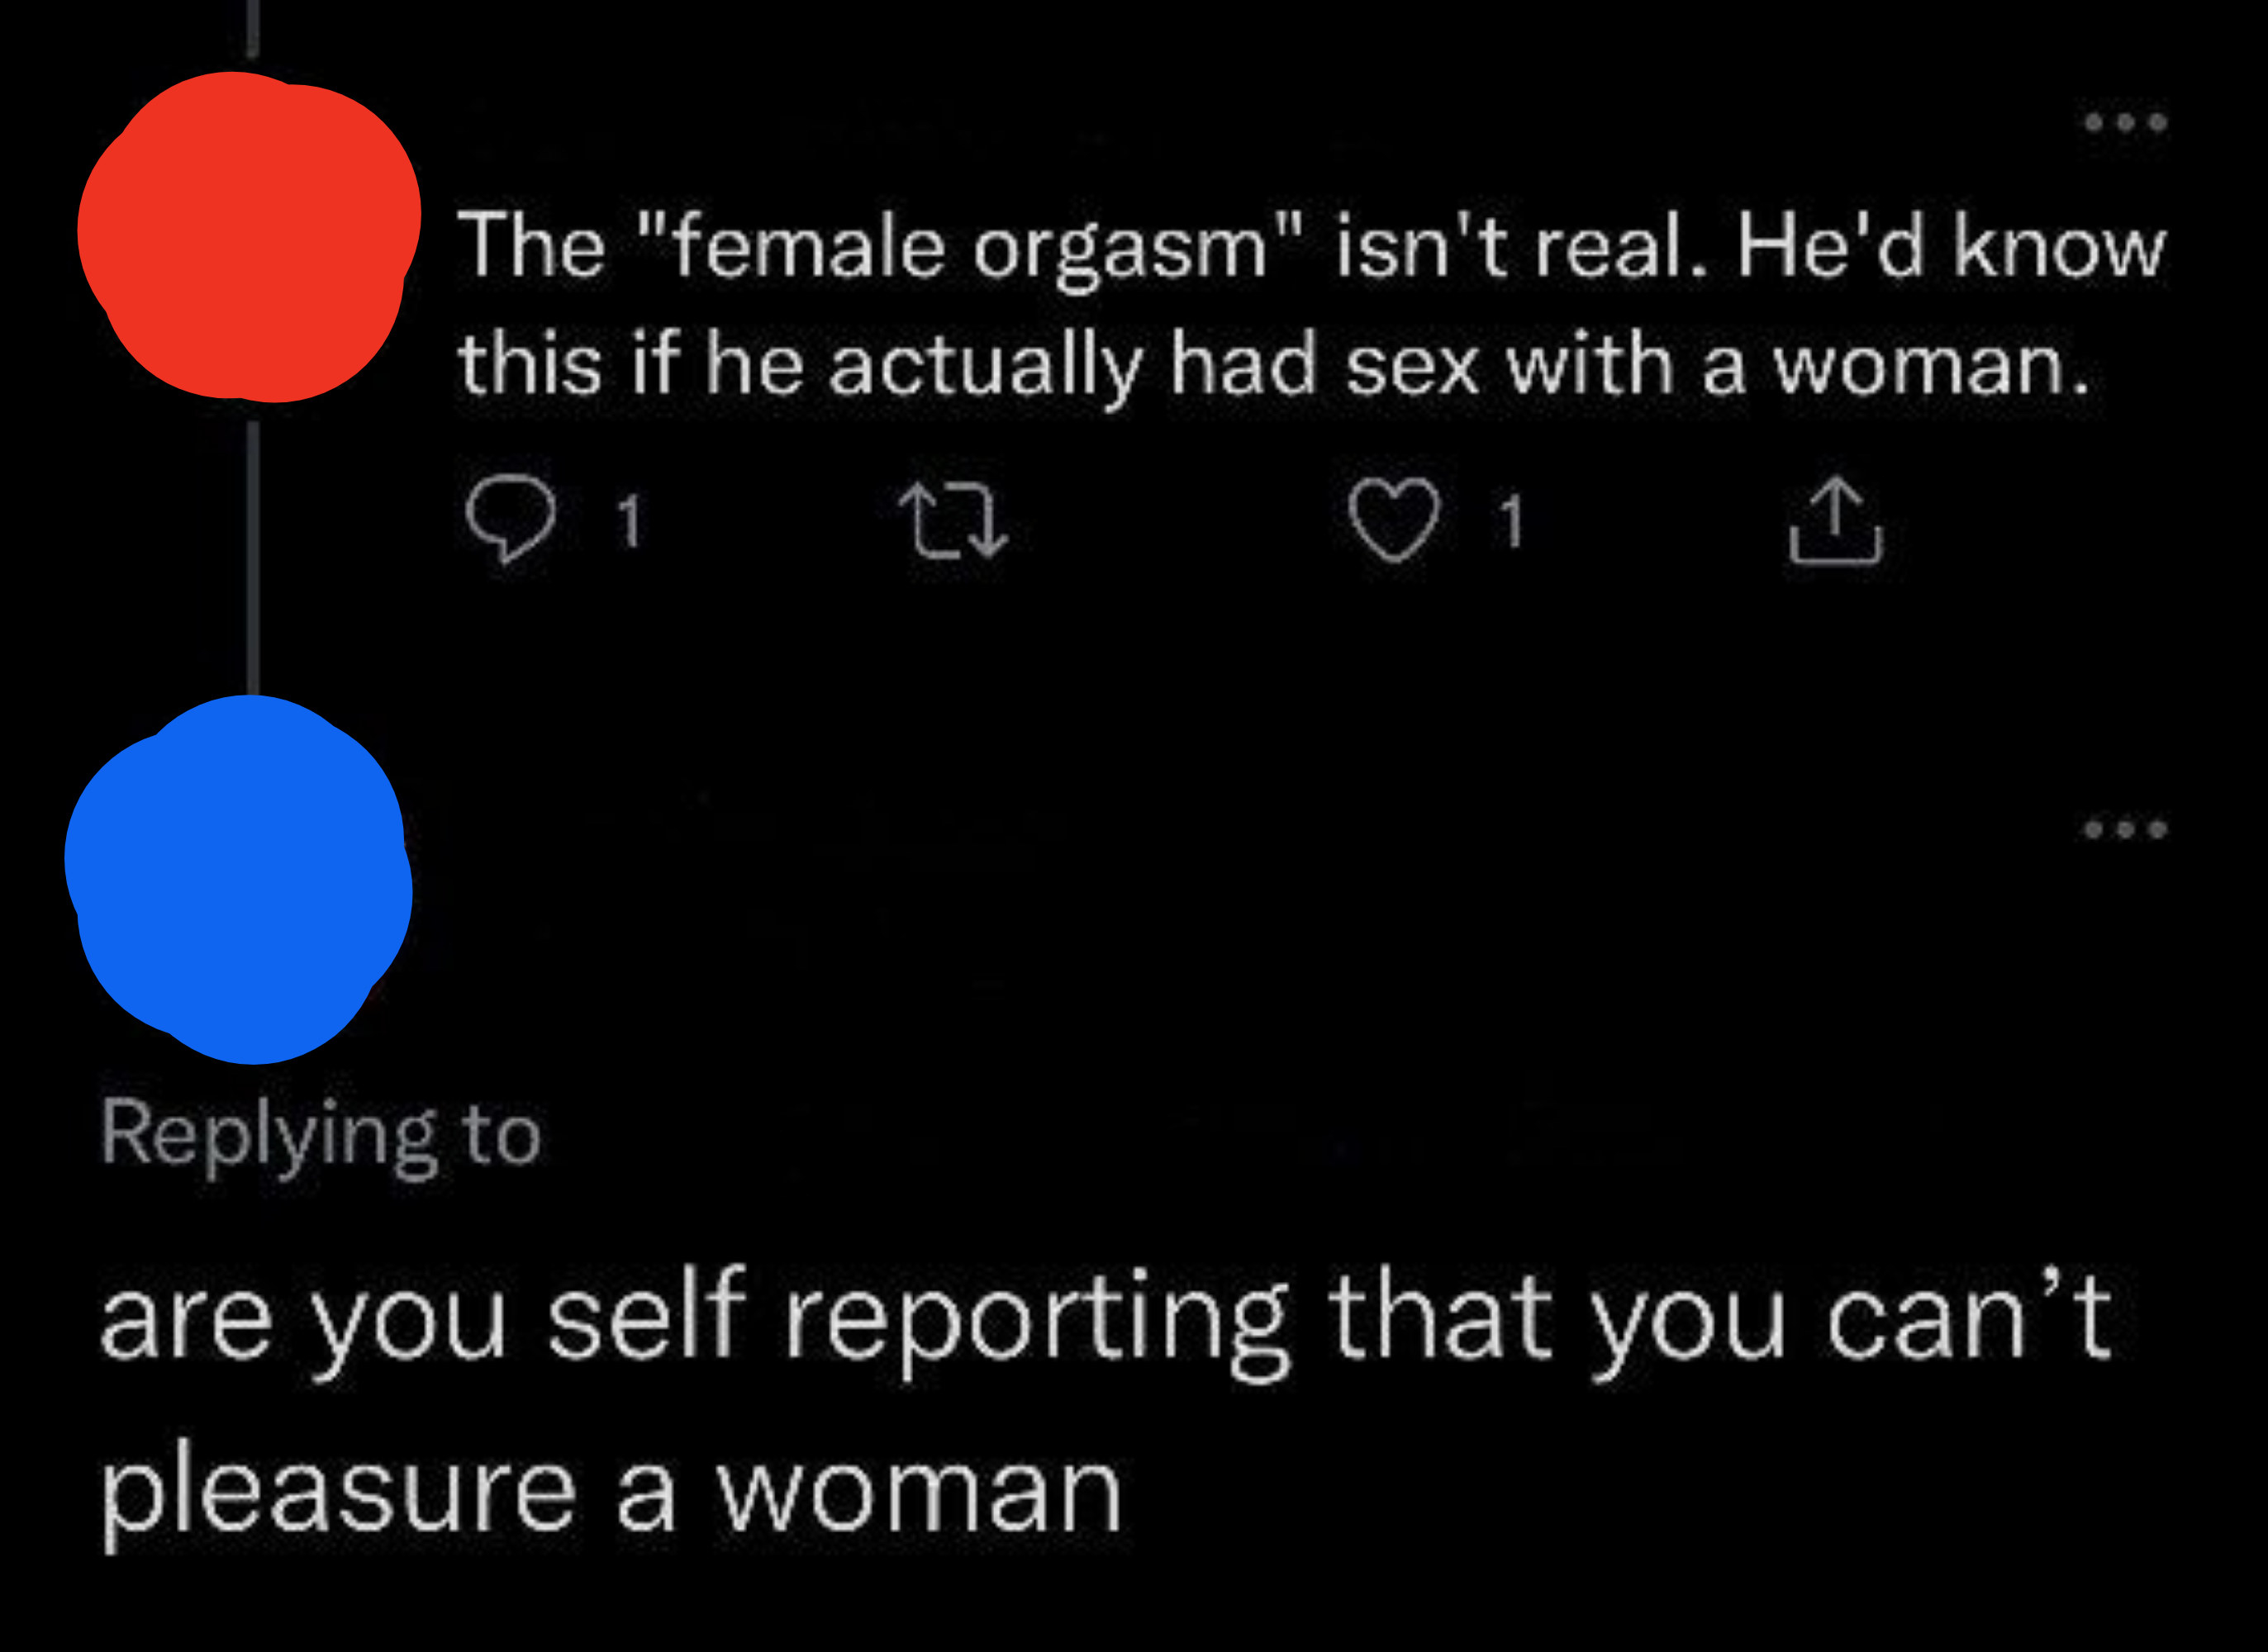 &quot;are you self reporting that you can&#x27;t pleasure a woman&quot;